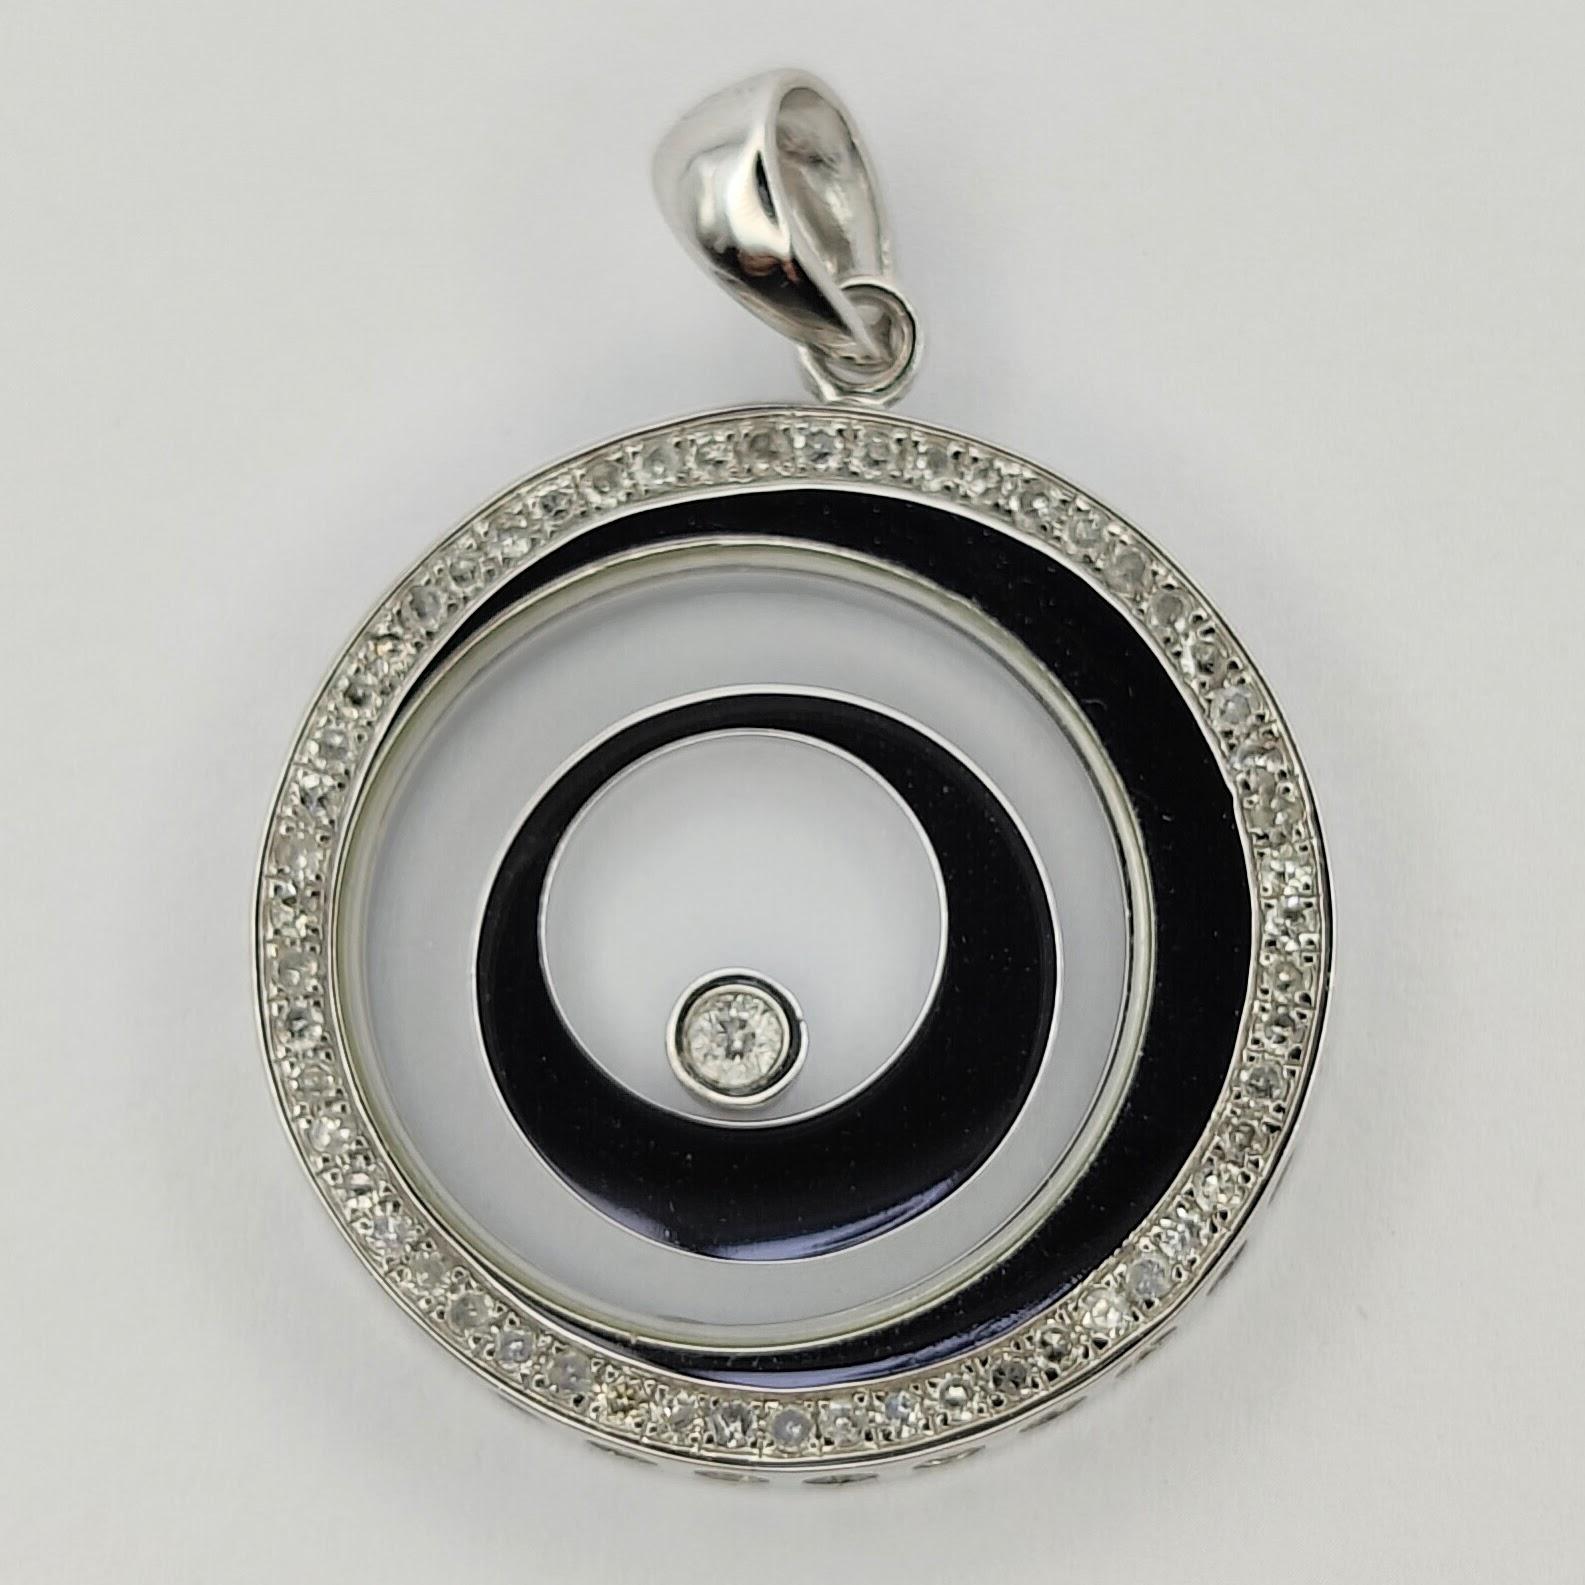 This beautiful Happy Diamonds eccentric circles pendant is the perfect choice for anyone looking for a unique and stylish accessory. The pendant itself is made of high quality 18k white gold and features a stunning design with an eccentric circle